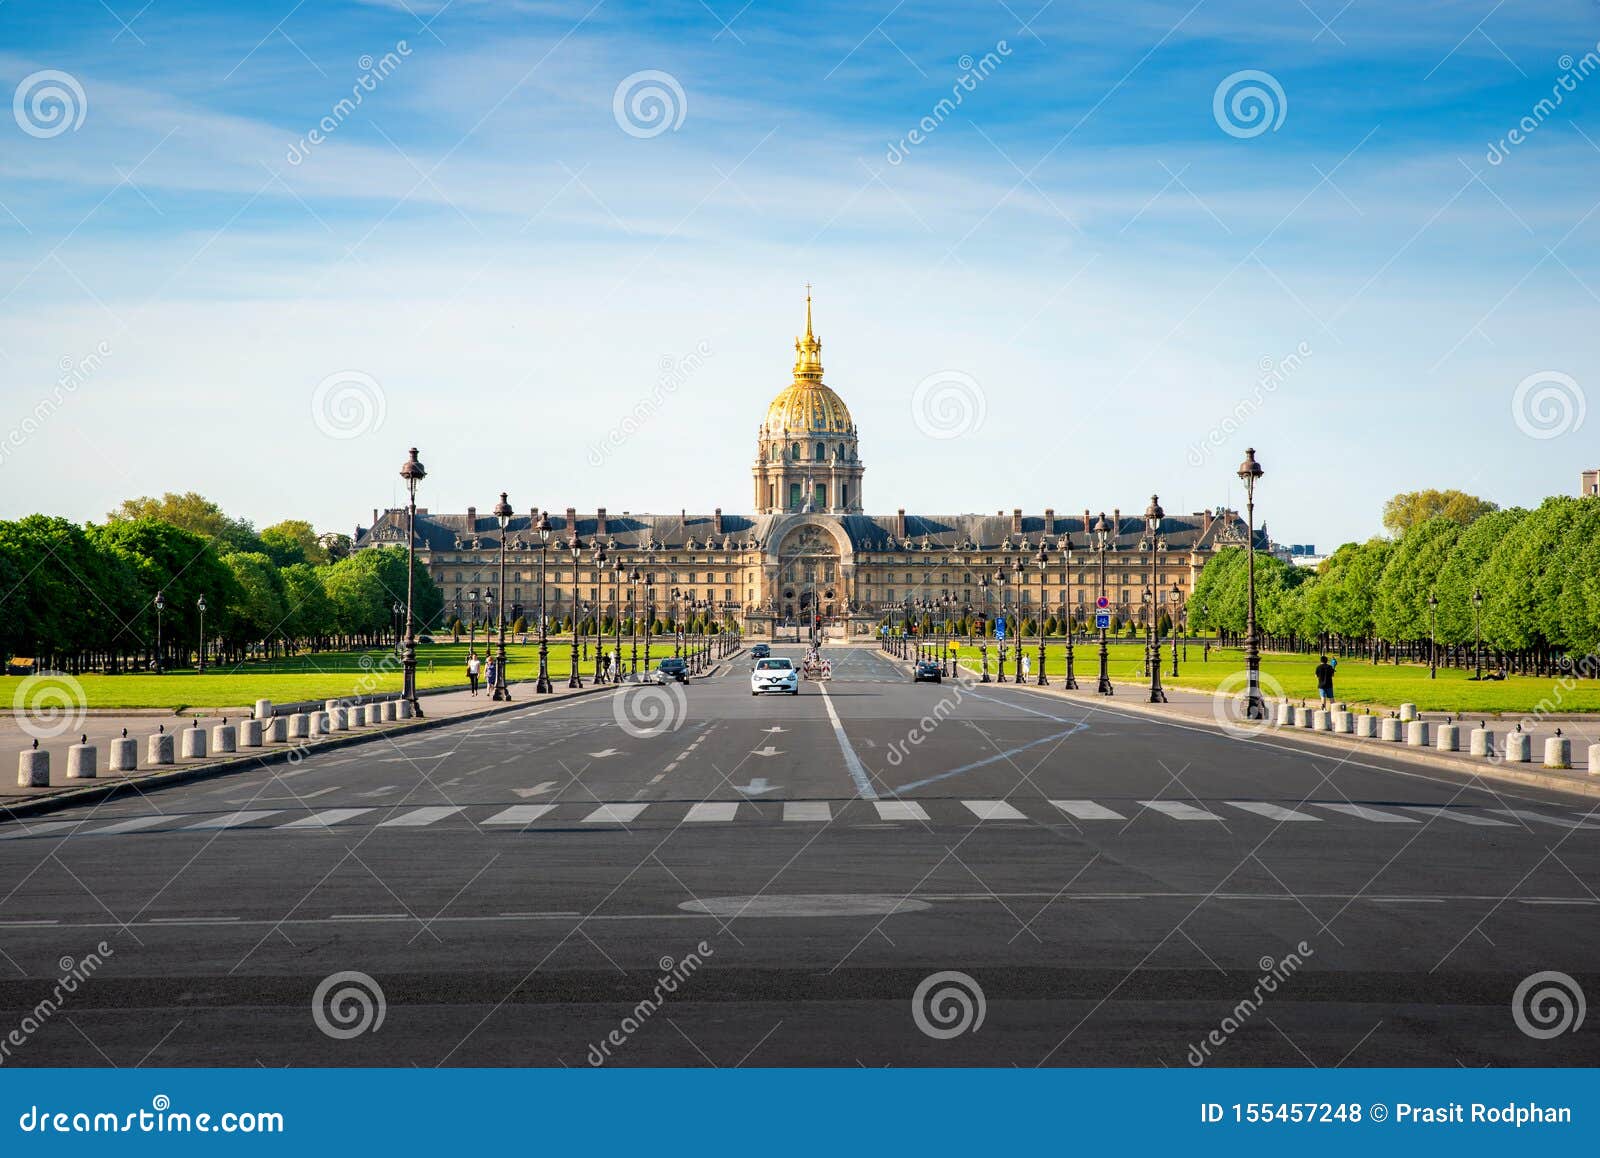 les invalides national residence of the invalids - complex of museums and monuments in paris, france